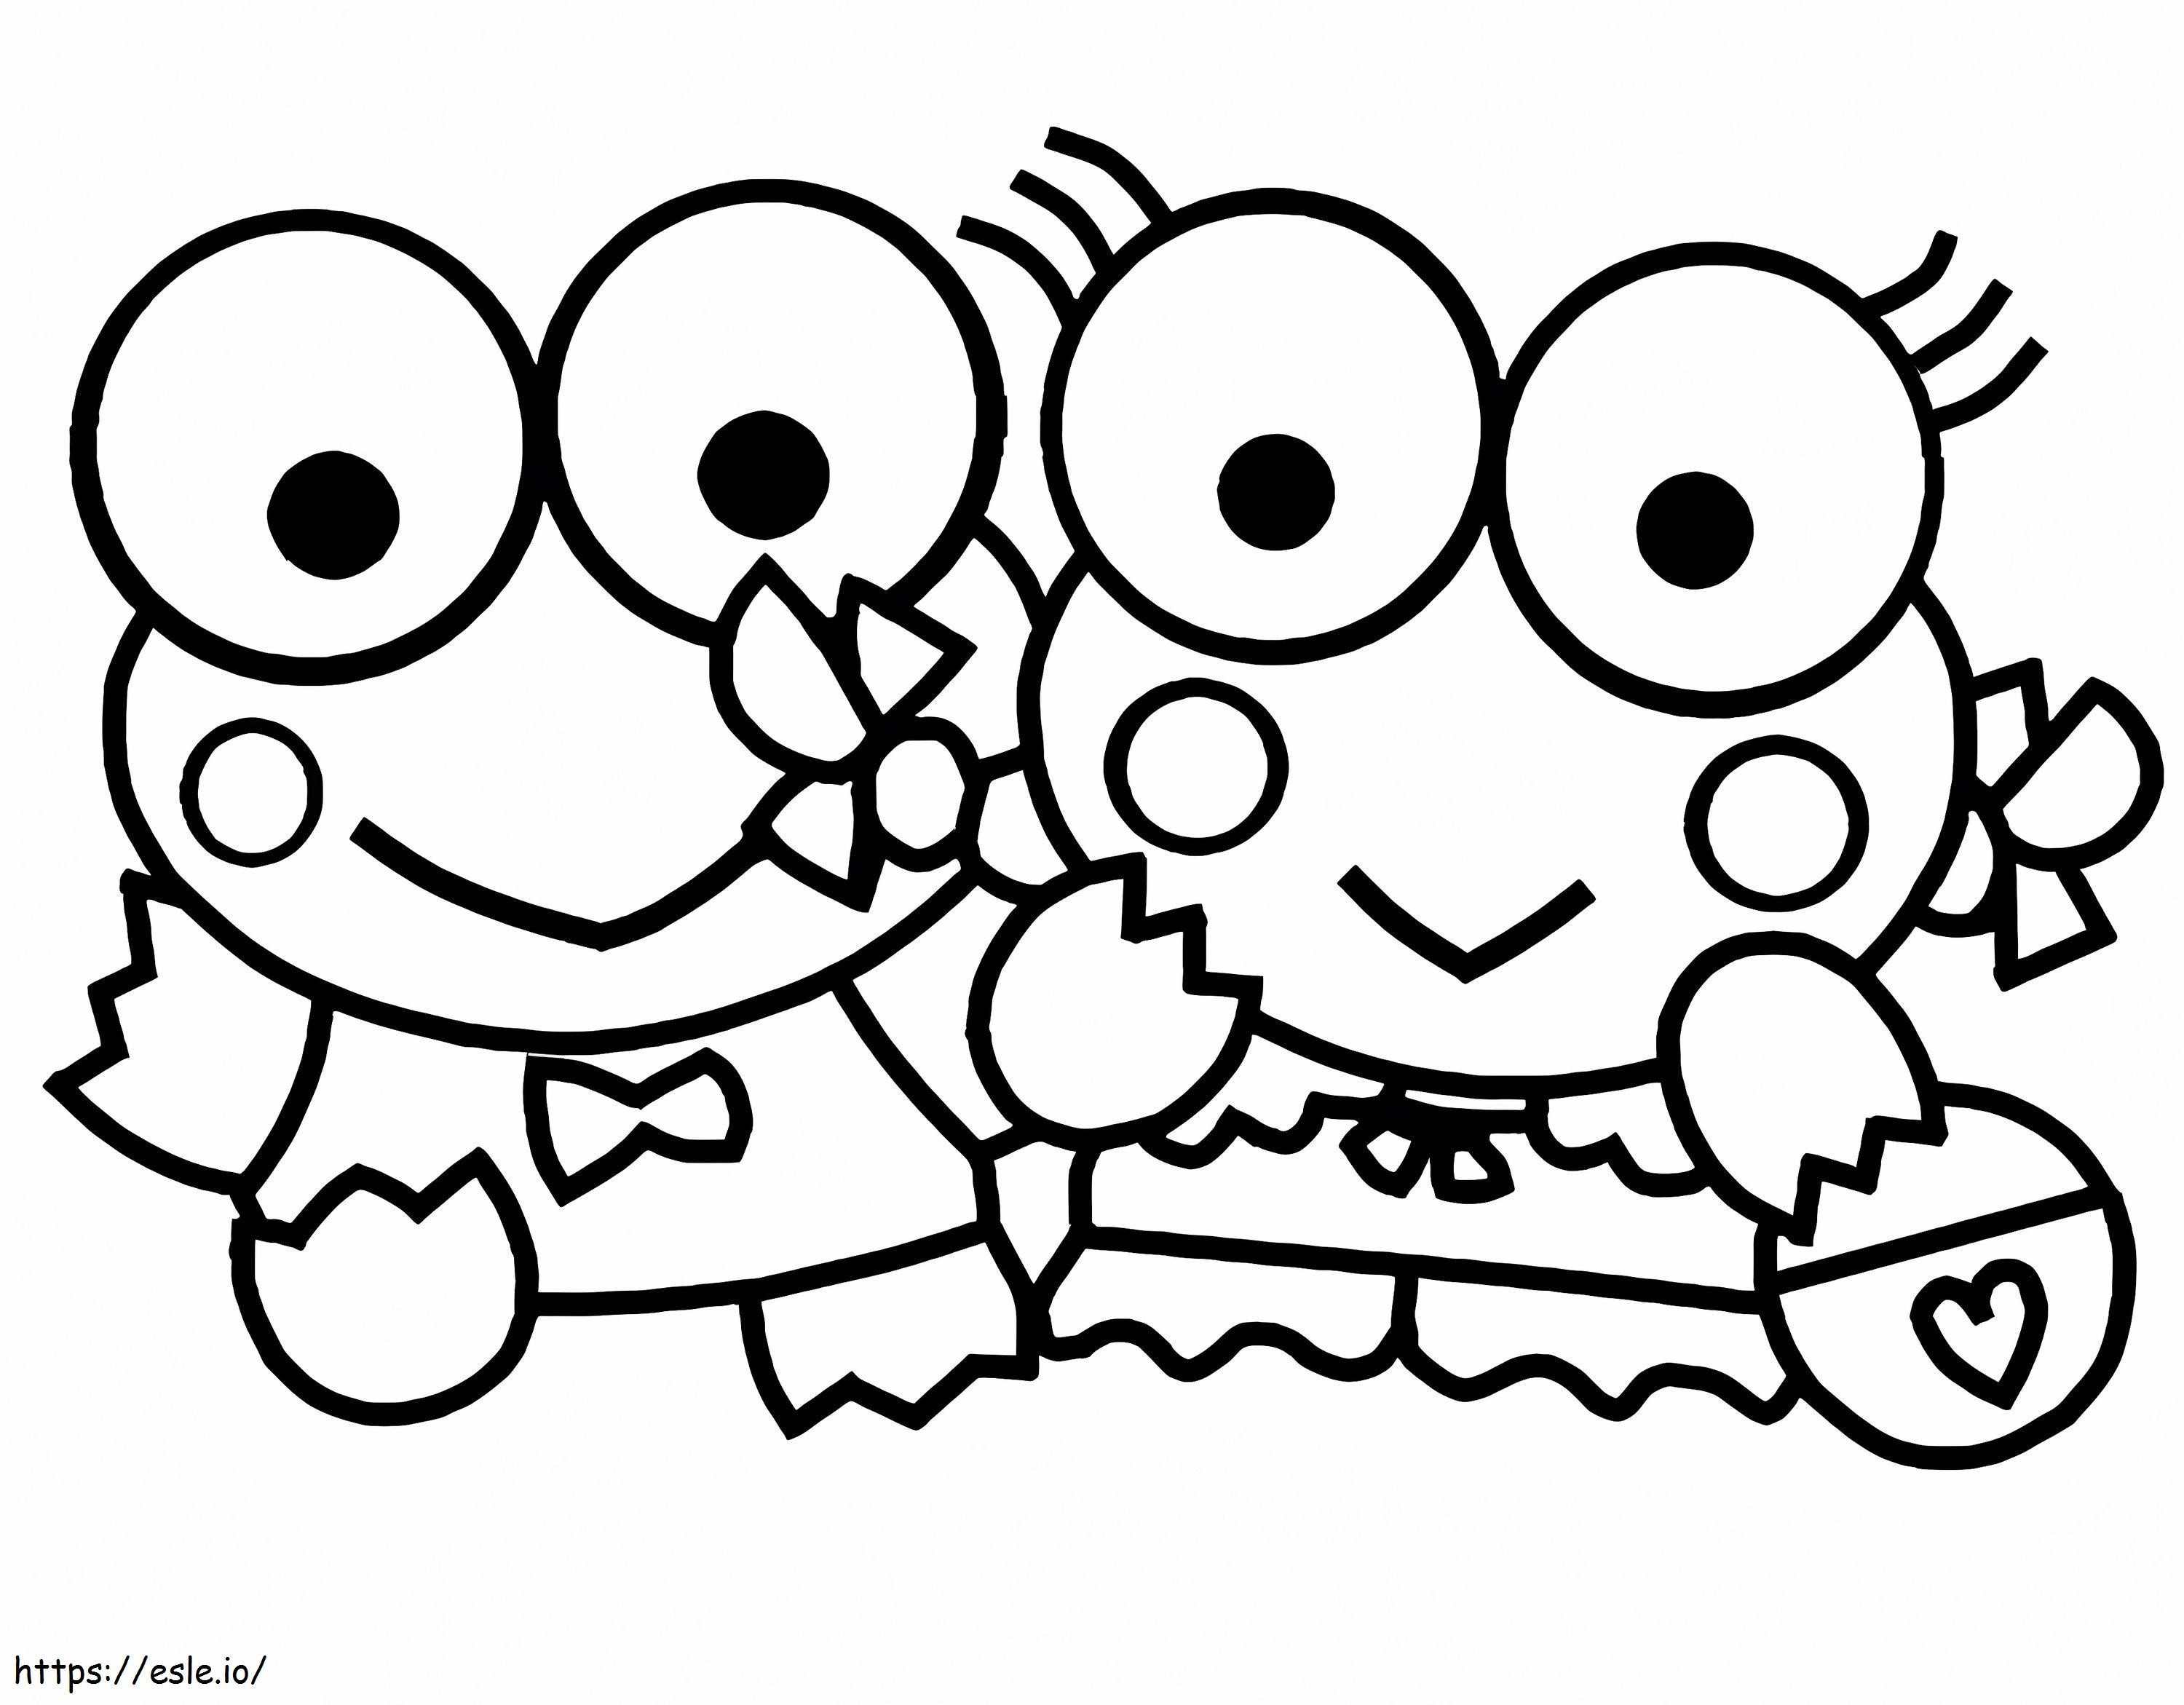 Keroppi With Girlfriend coloring page